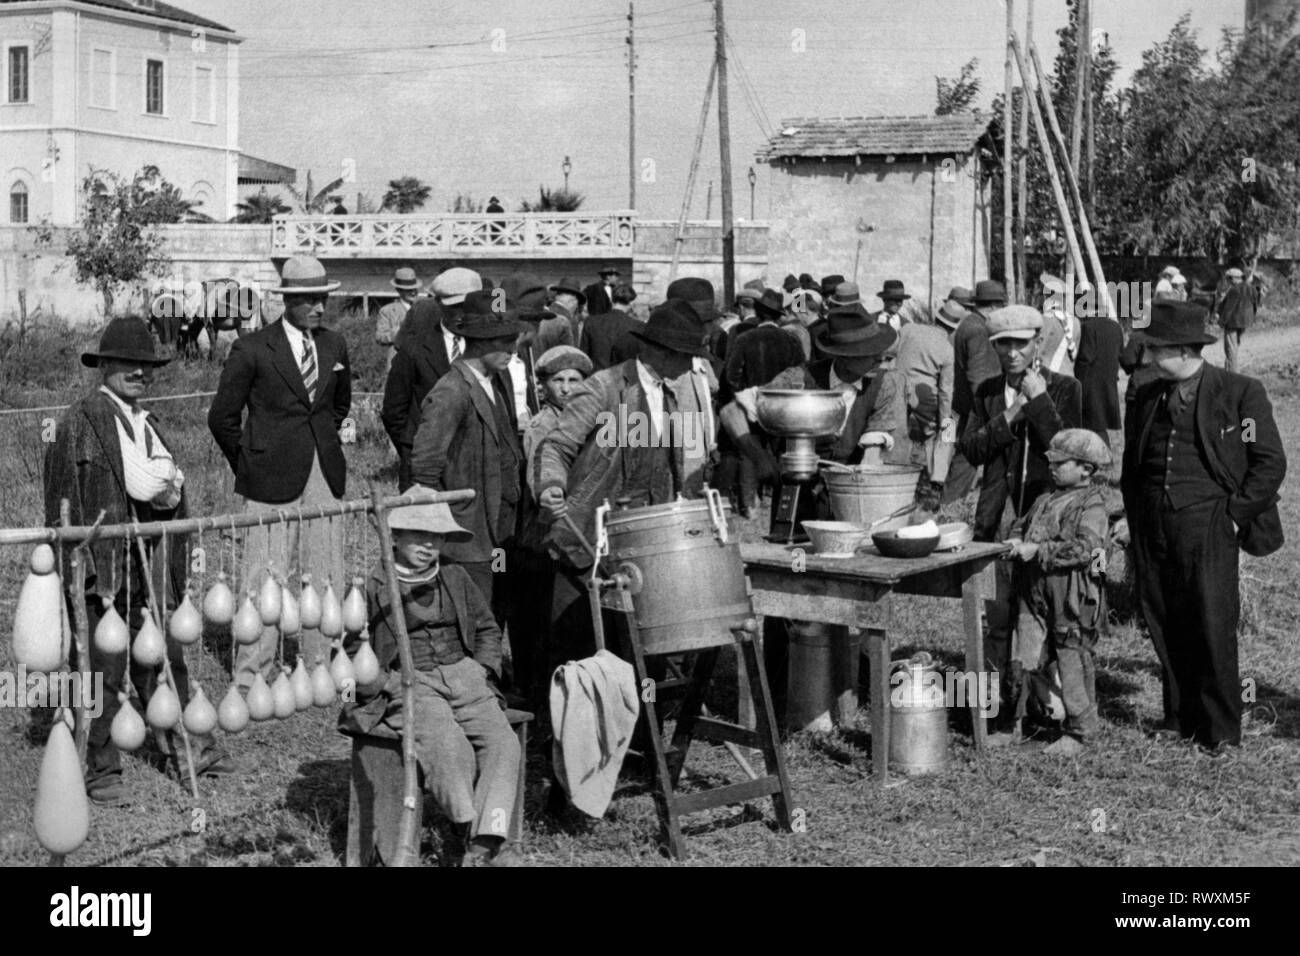 Europe, Italy, Calabria, Sant'Eufemia, demonstration of a machine during the agricultural fair, 1920-30 Stock Photo